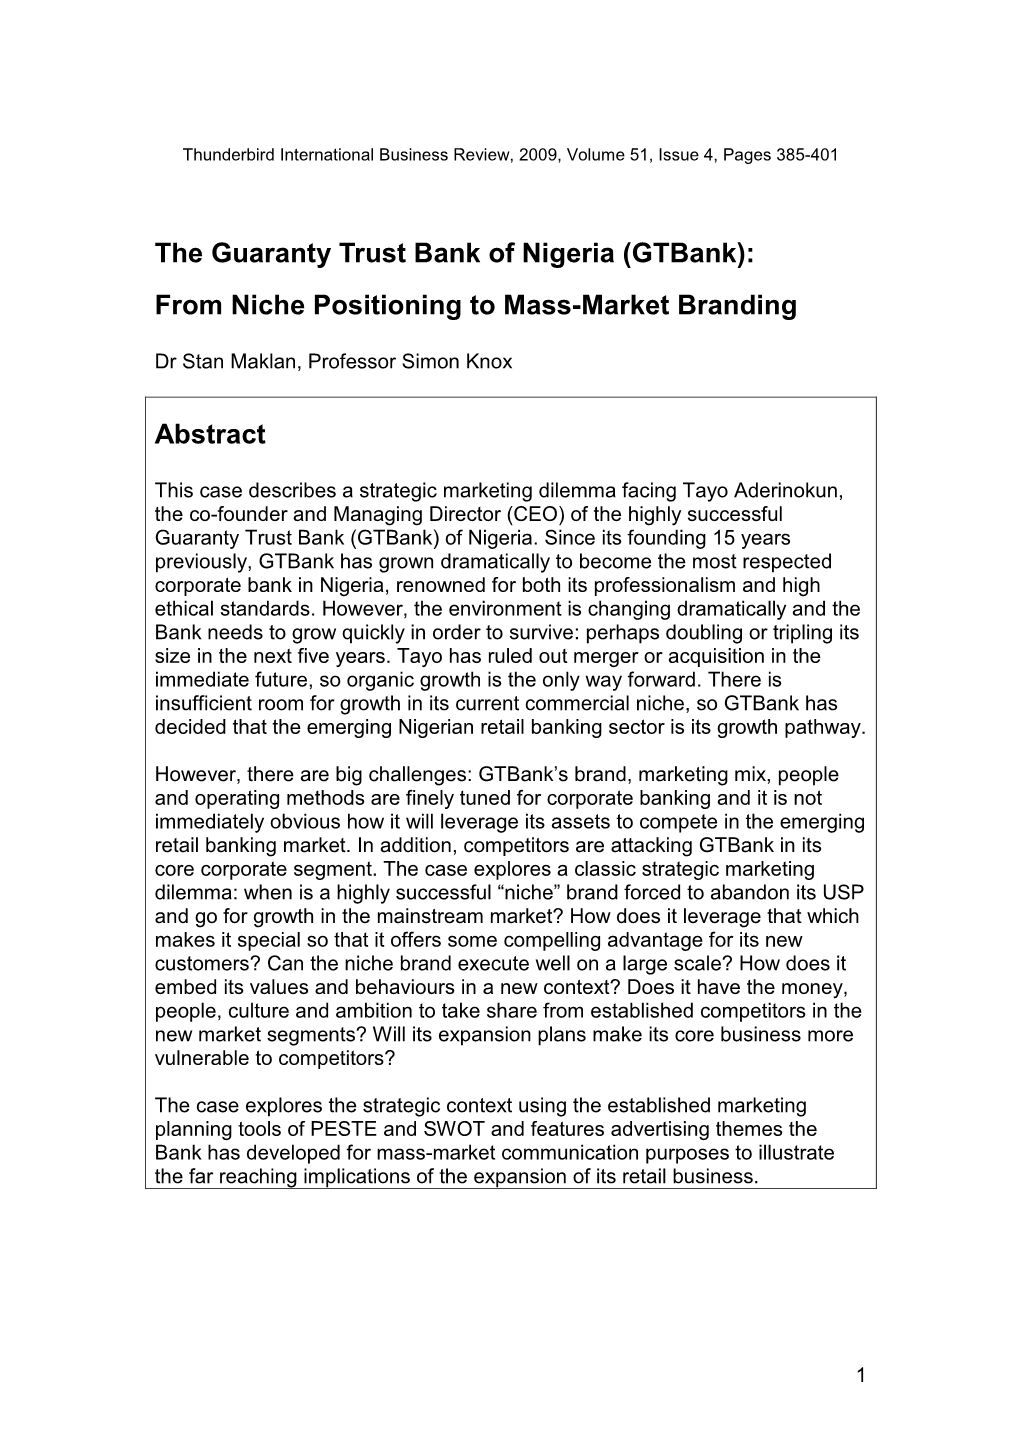 The Guaranty Trust Bank of Nigeria (Gtbank): from Niche Positioning to Mass-Market Branding